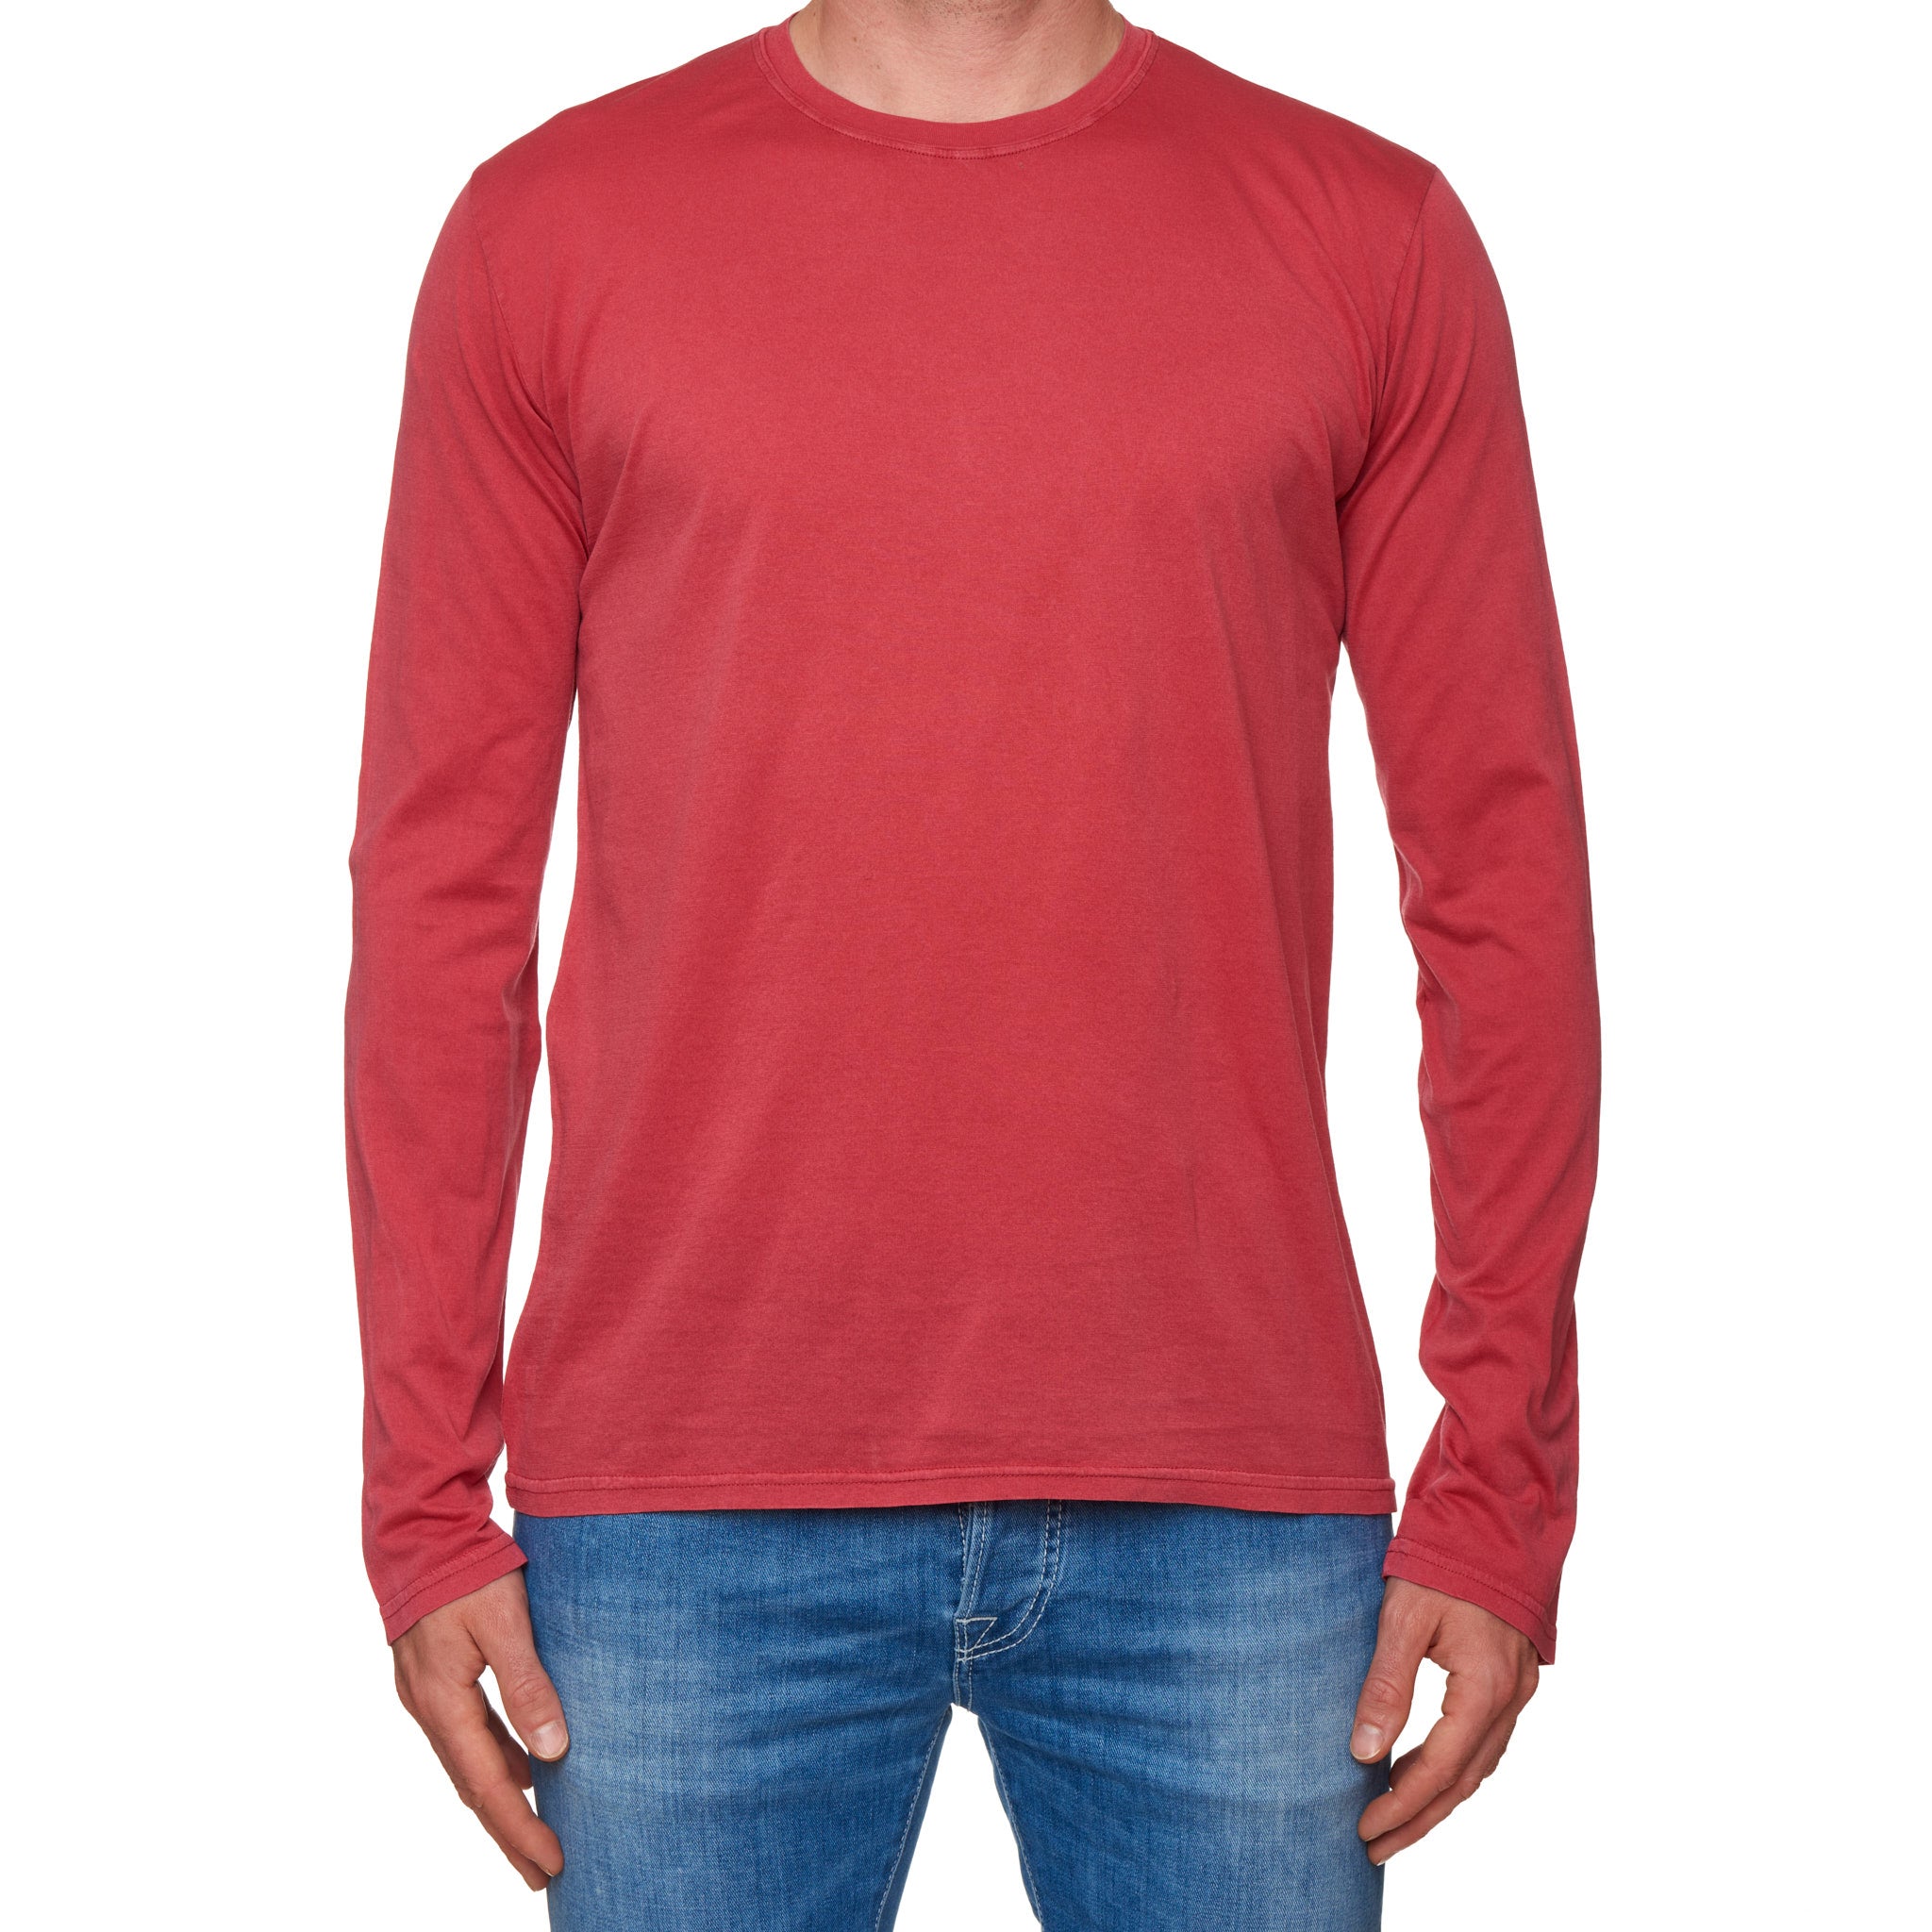 FEDELI "Gary" Coral Cotton Superlight Frosted Long Sleeve T-Shirt EU 50 NEW US M FEDELI